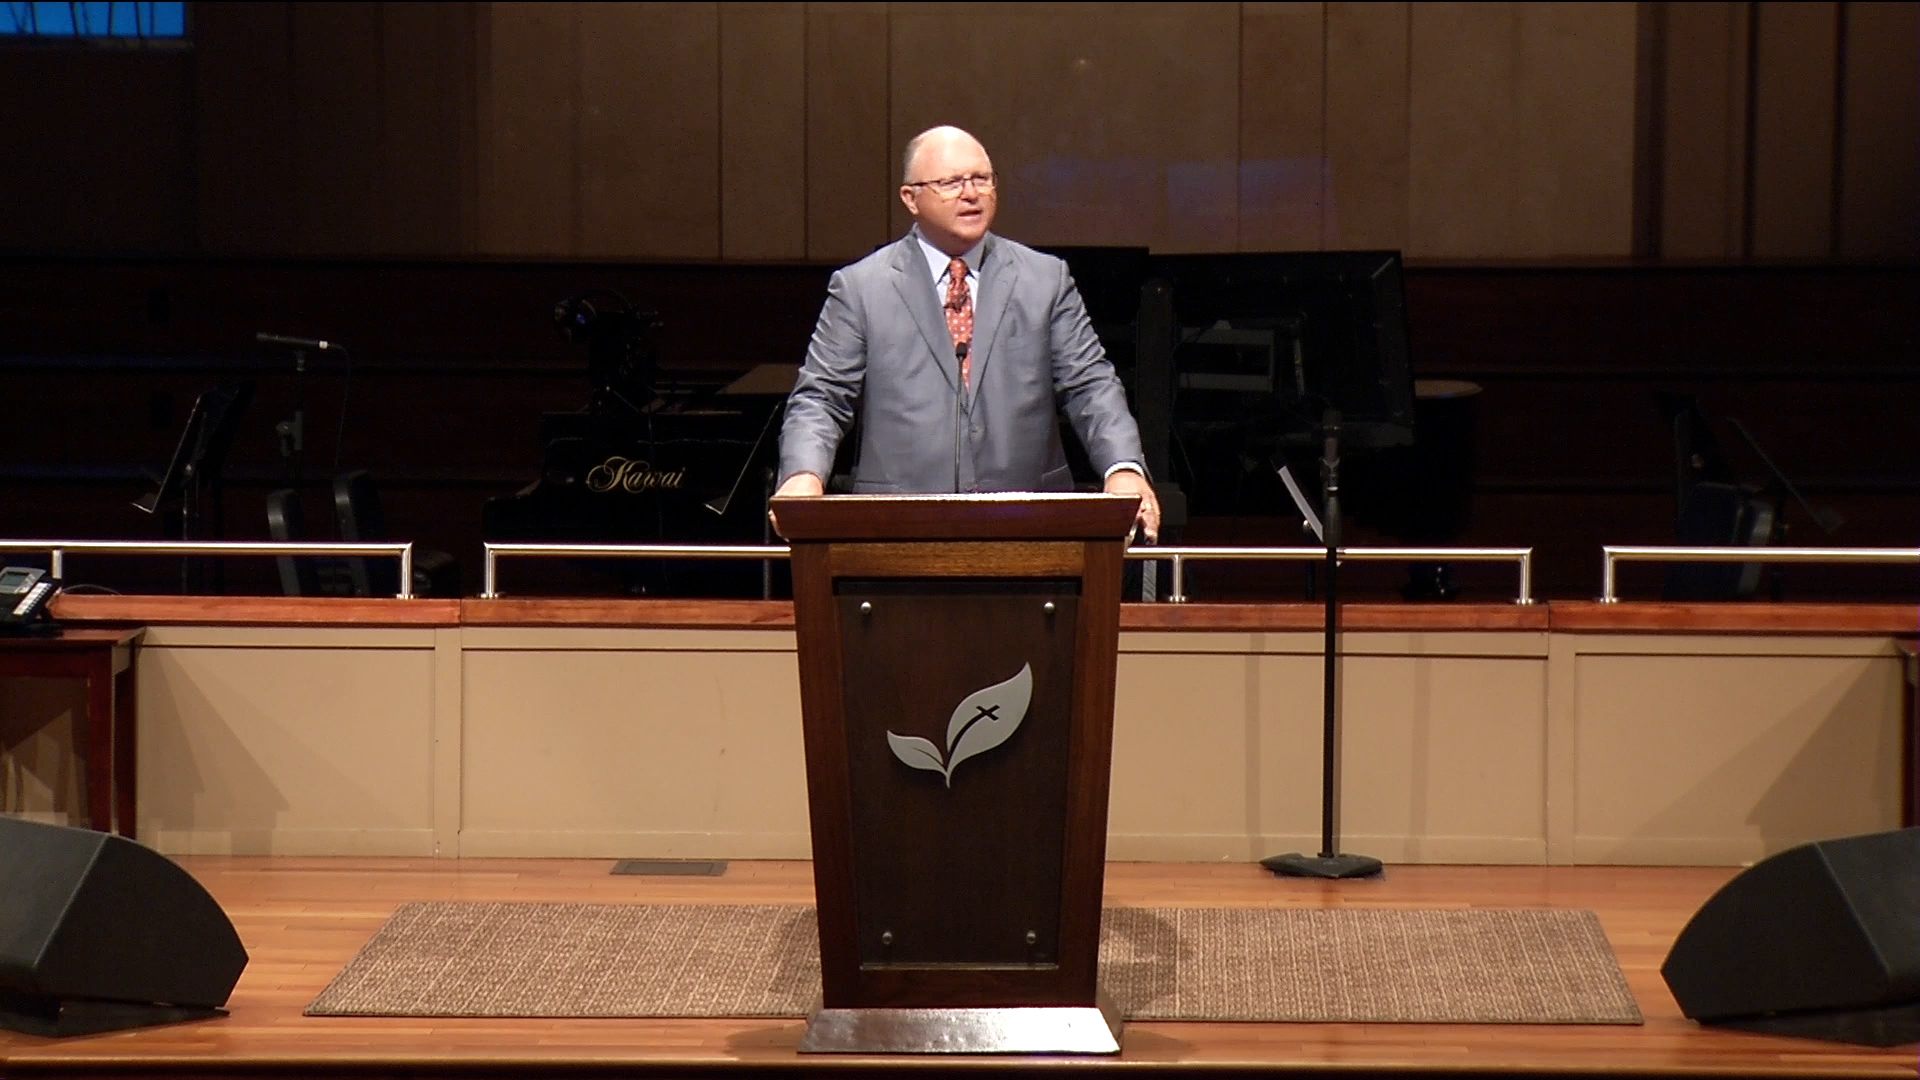 Pastor Paul Chappell: Jesus Can Do the Miraculous